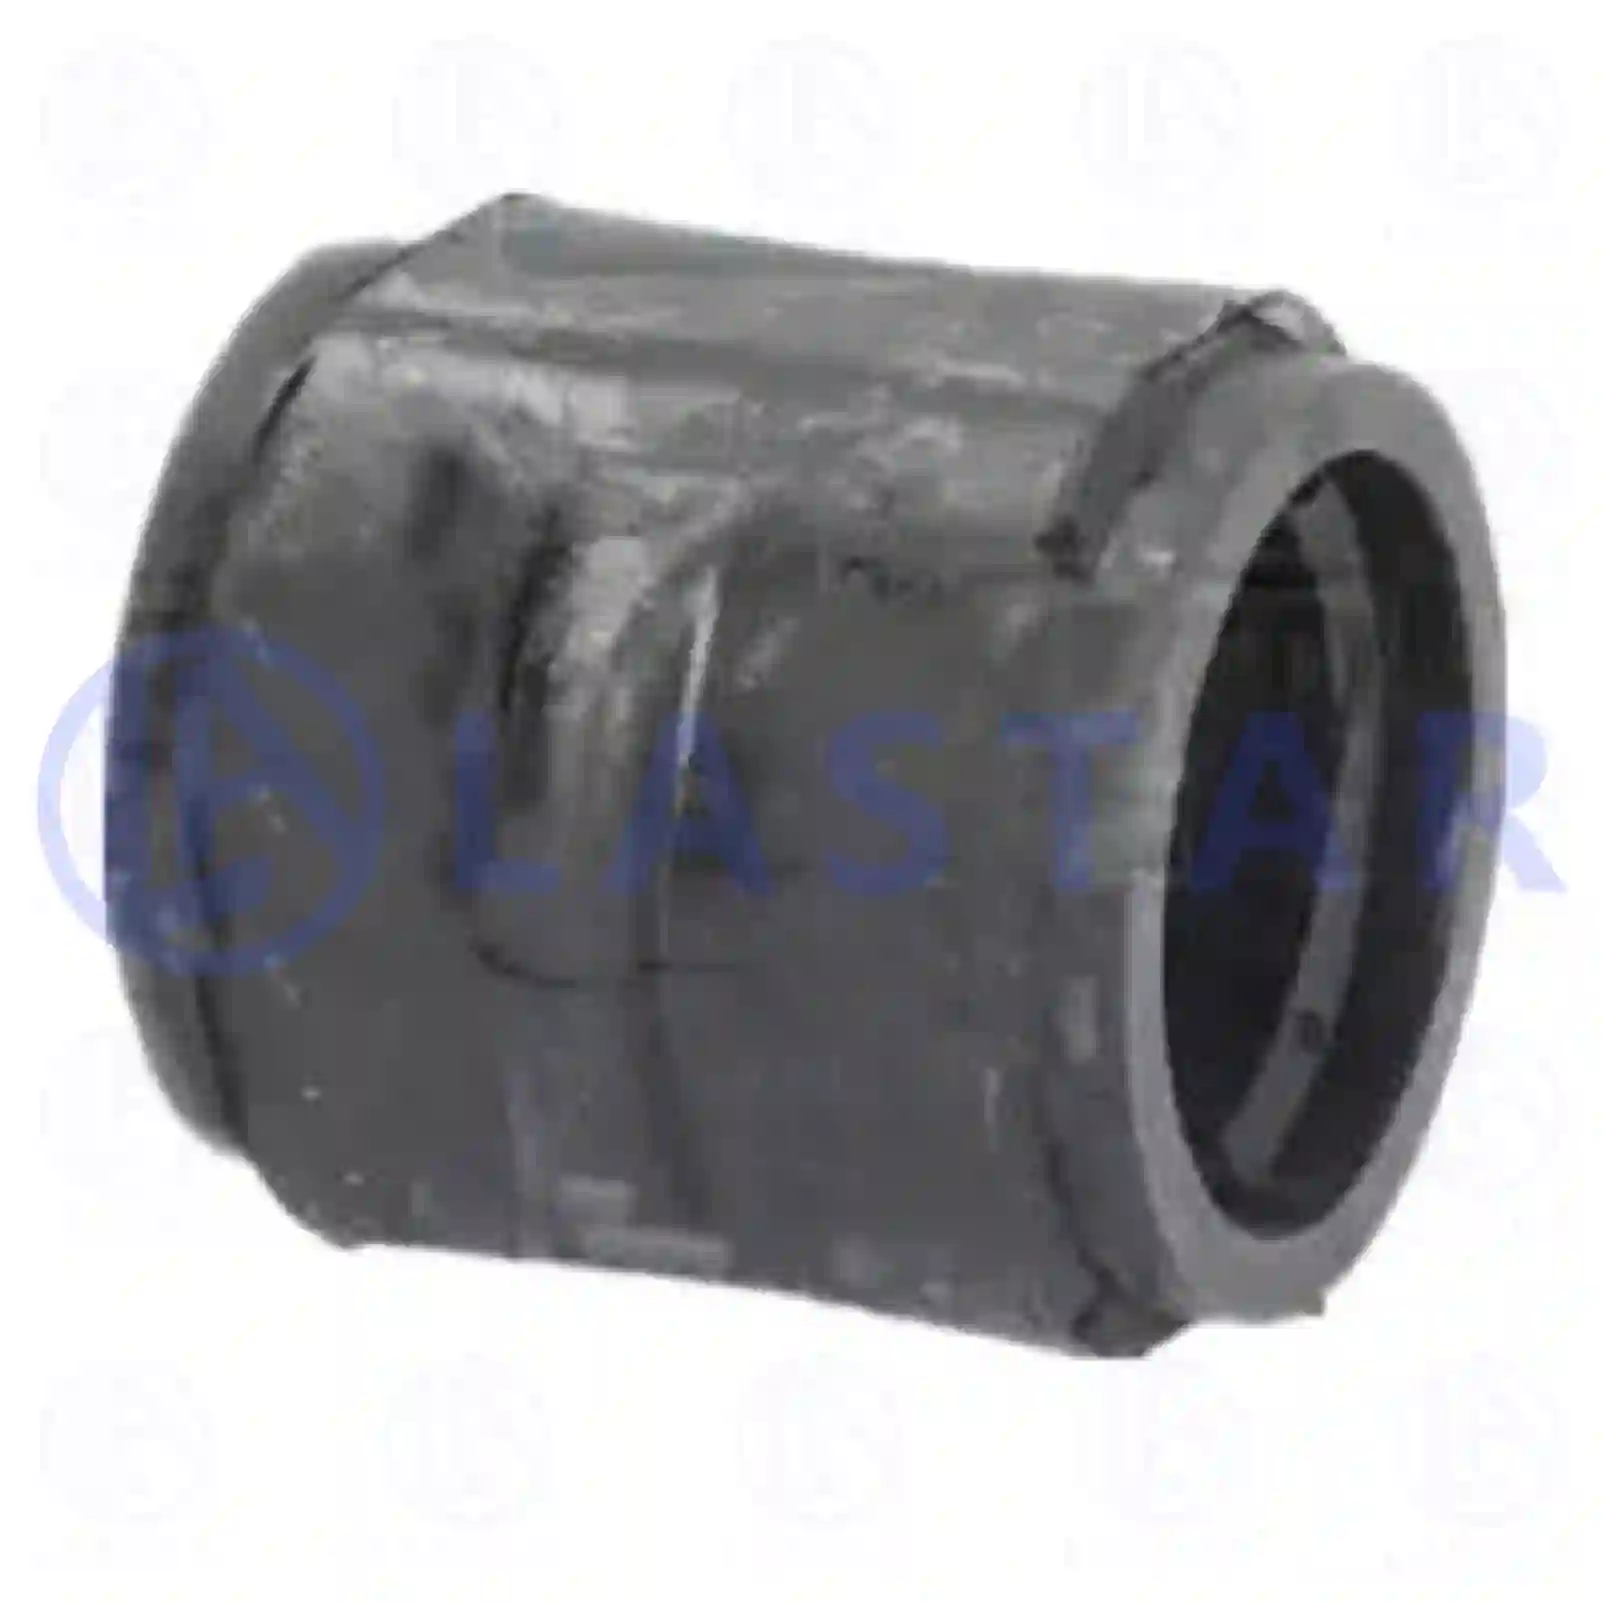 Bushing, stabilizer, 77728349, 9743230185 ||  77728349 Lastar Spare Part | Truck Spare Parts, Auotomotive Spare Parts Bushing, stabilizer, 77728349, 9743230185 ||  77728349 Lastar Spare Part | Truck Spare Parts, Auotomotive Spare Parts